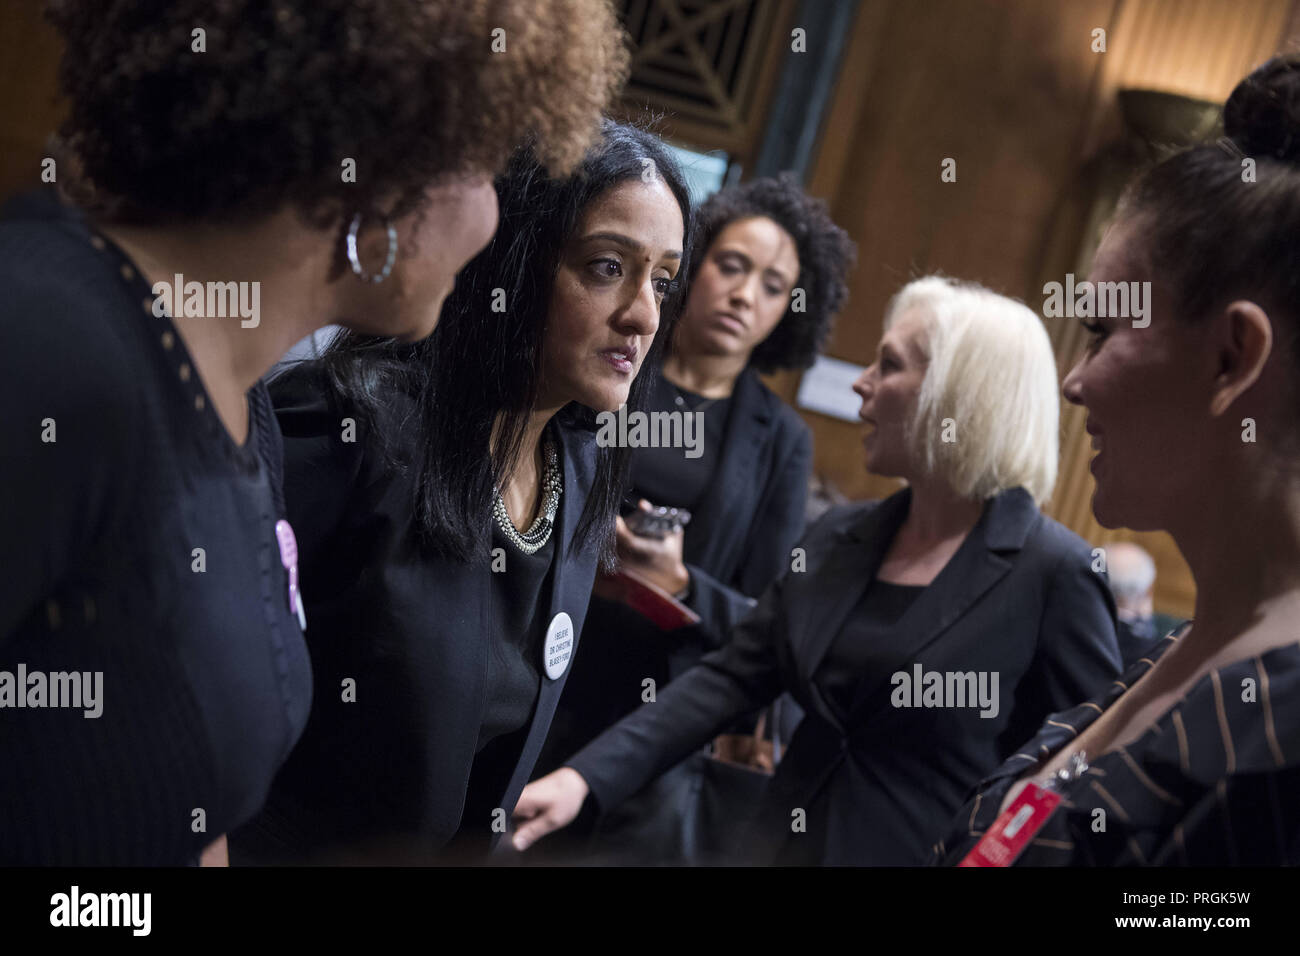 Washington, DC, USA. 27th Sep, 2018. UNITED DCS - SEPTEMBER 27: Vanita Gupta, second from left, talks with Actress Alyssa Milano, right, in the hearing room before the start of Dr. Christine Blasey Ford's appearance in the Senate Judiciary Committee to testify on the nomination of Brett M. Kavanaugh to be an associate justice of the Supreme Court of the United States. (Photo By Tom Williams/CQ Roll Call) Credit: Tom Williams/CNP/ZUMA Wire/Alamy Live News Stock Photo